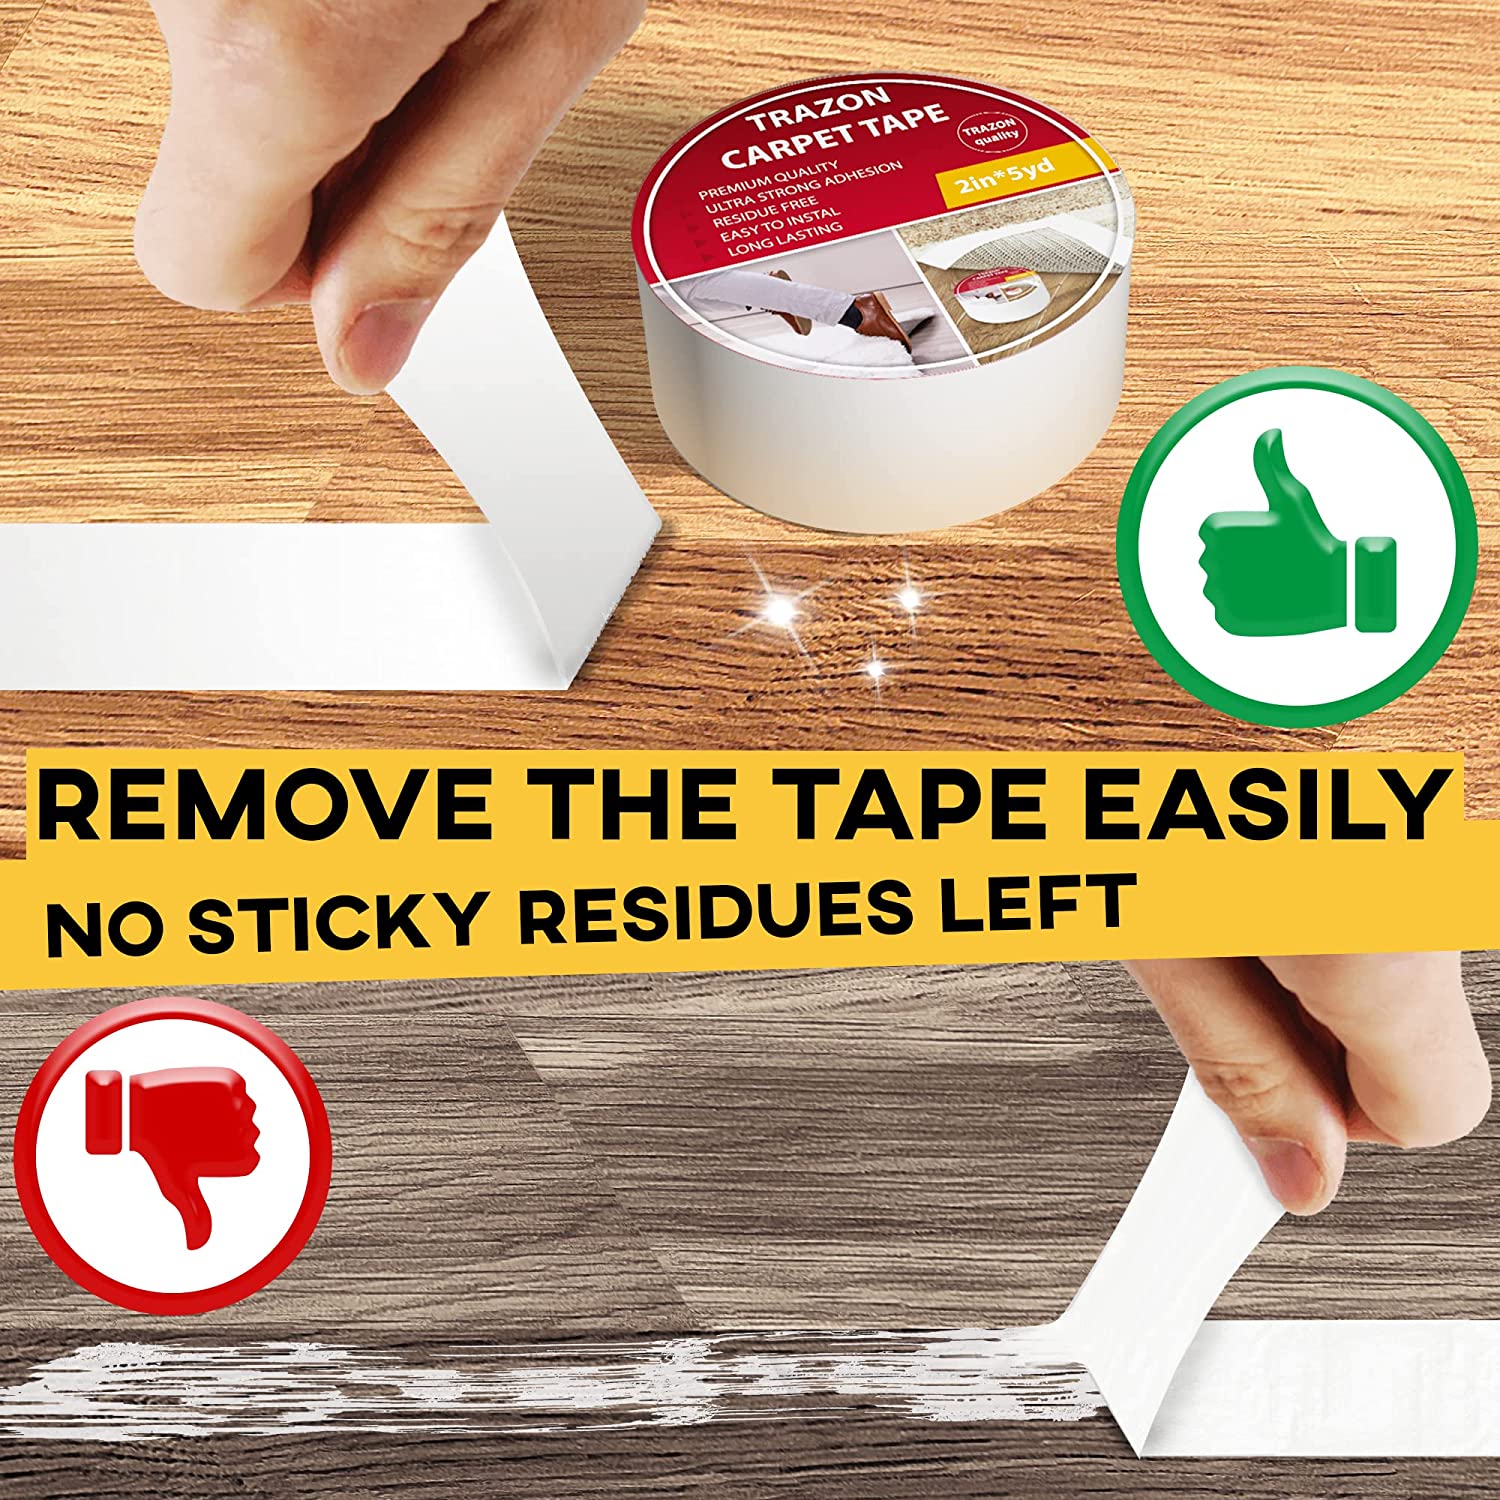 TargetControl™ 50ft | Carpet Tape Double Sided Heavy Duty, Double Sided  Tape, Rug Tape, Extra Strong Rug Gripper Tape for Wooden Floors, Tape for